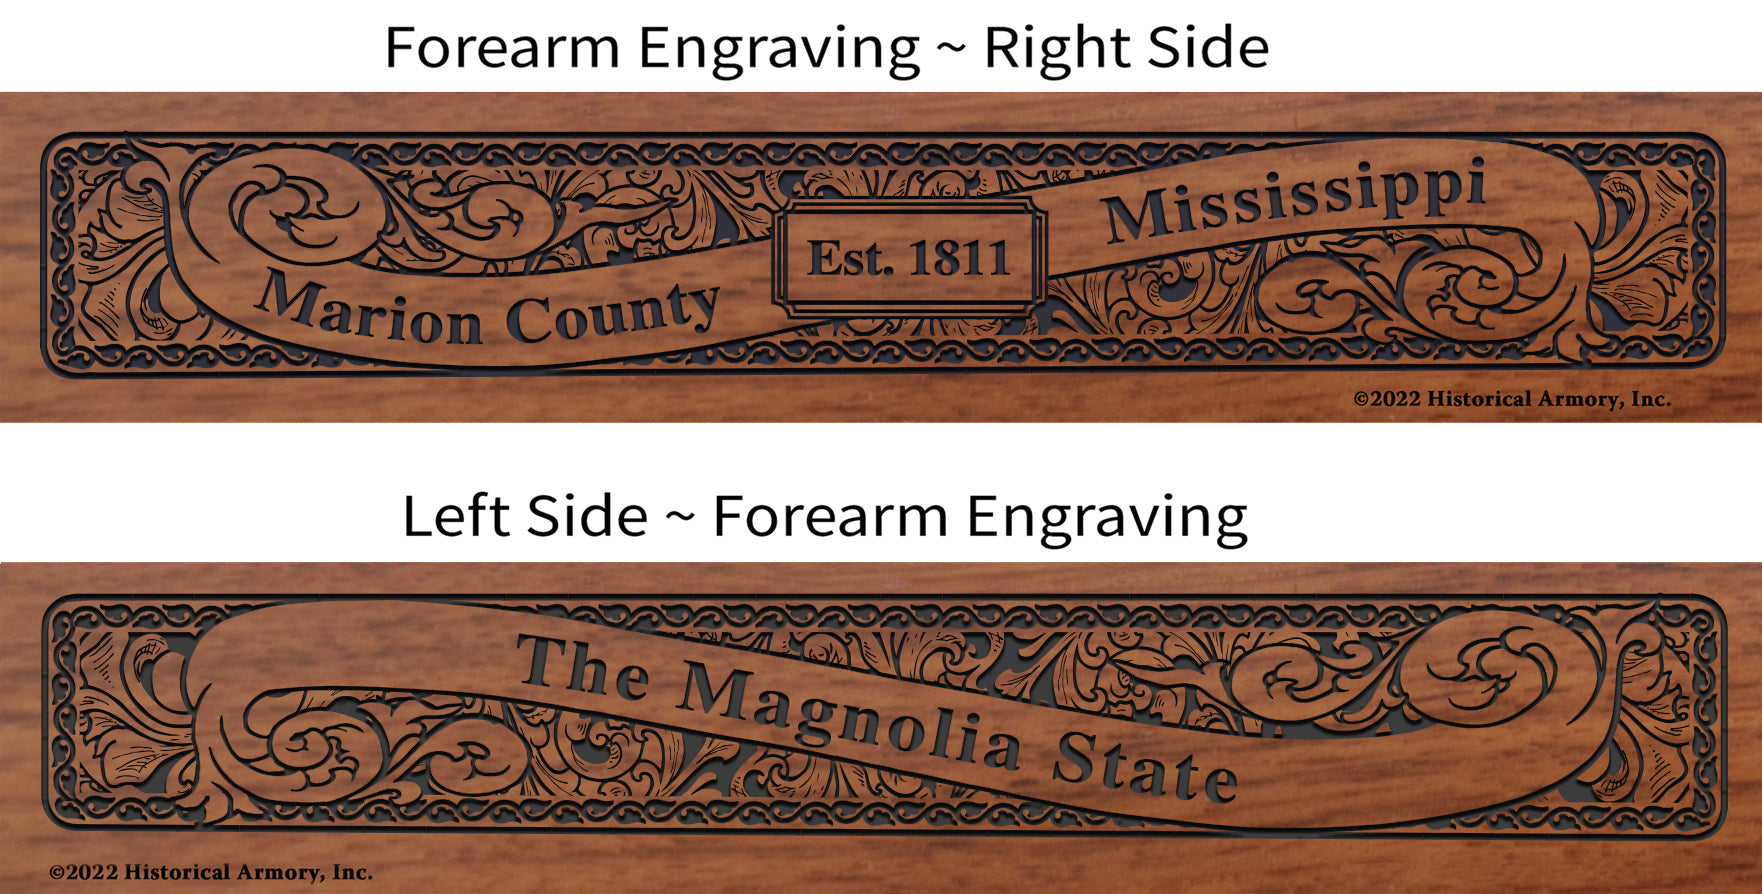 Marion County Mississippi Engraved Rifle Forearm